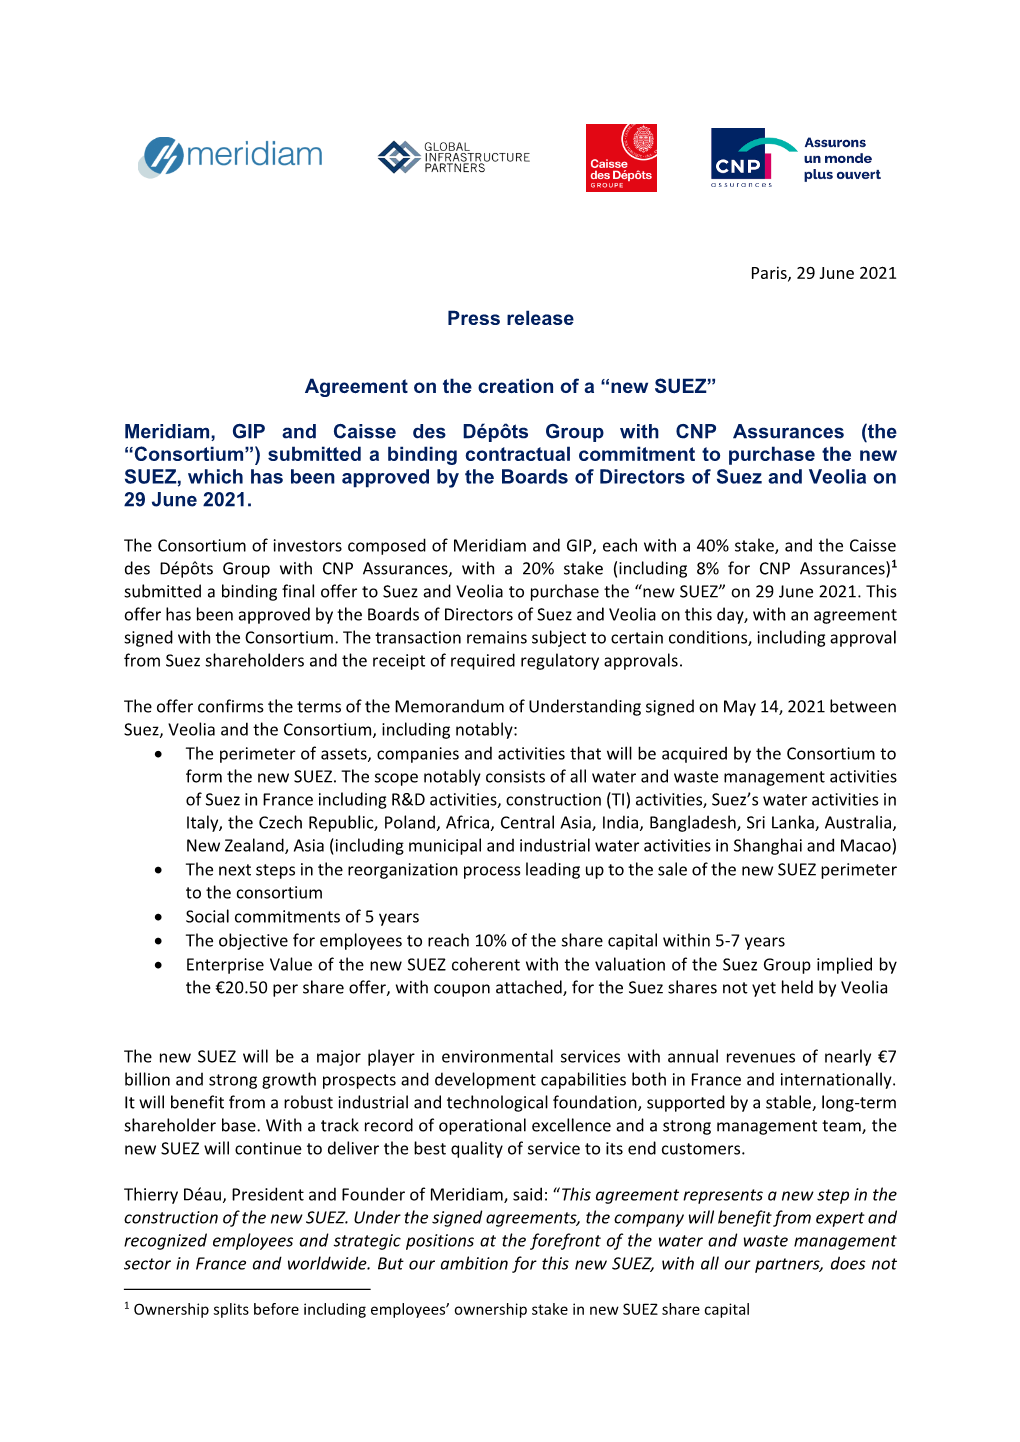 Press Release Agreement on the Creation of a “New SUEZ” Meridiam, GIP and Caisse Des Dépôts Group with CNP Assurances (The